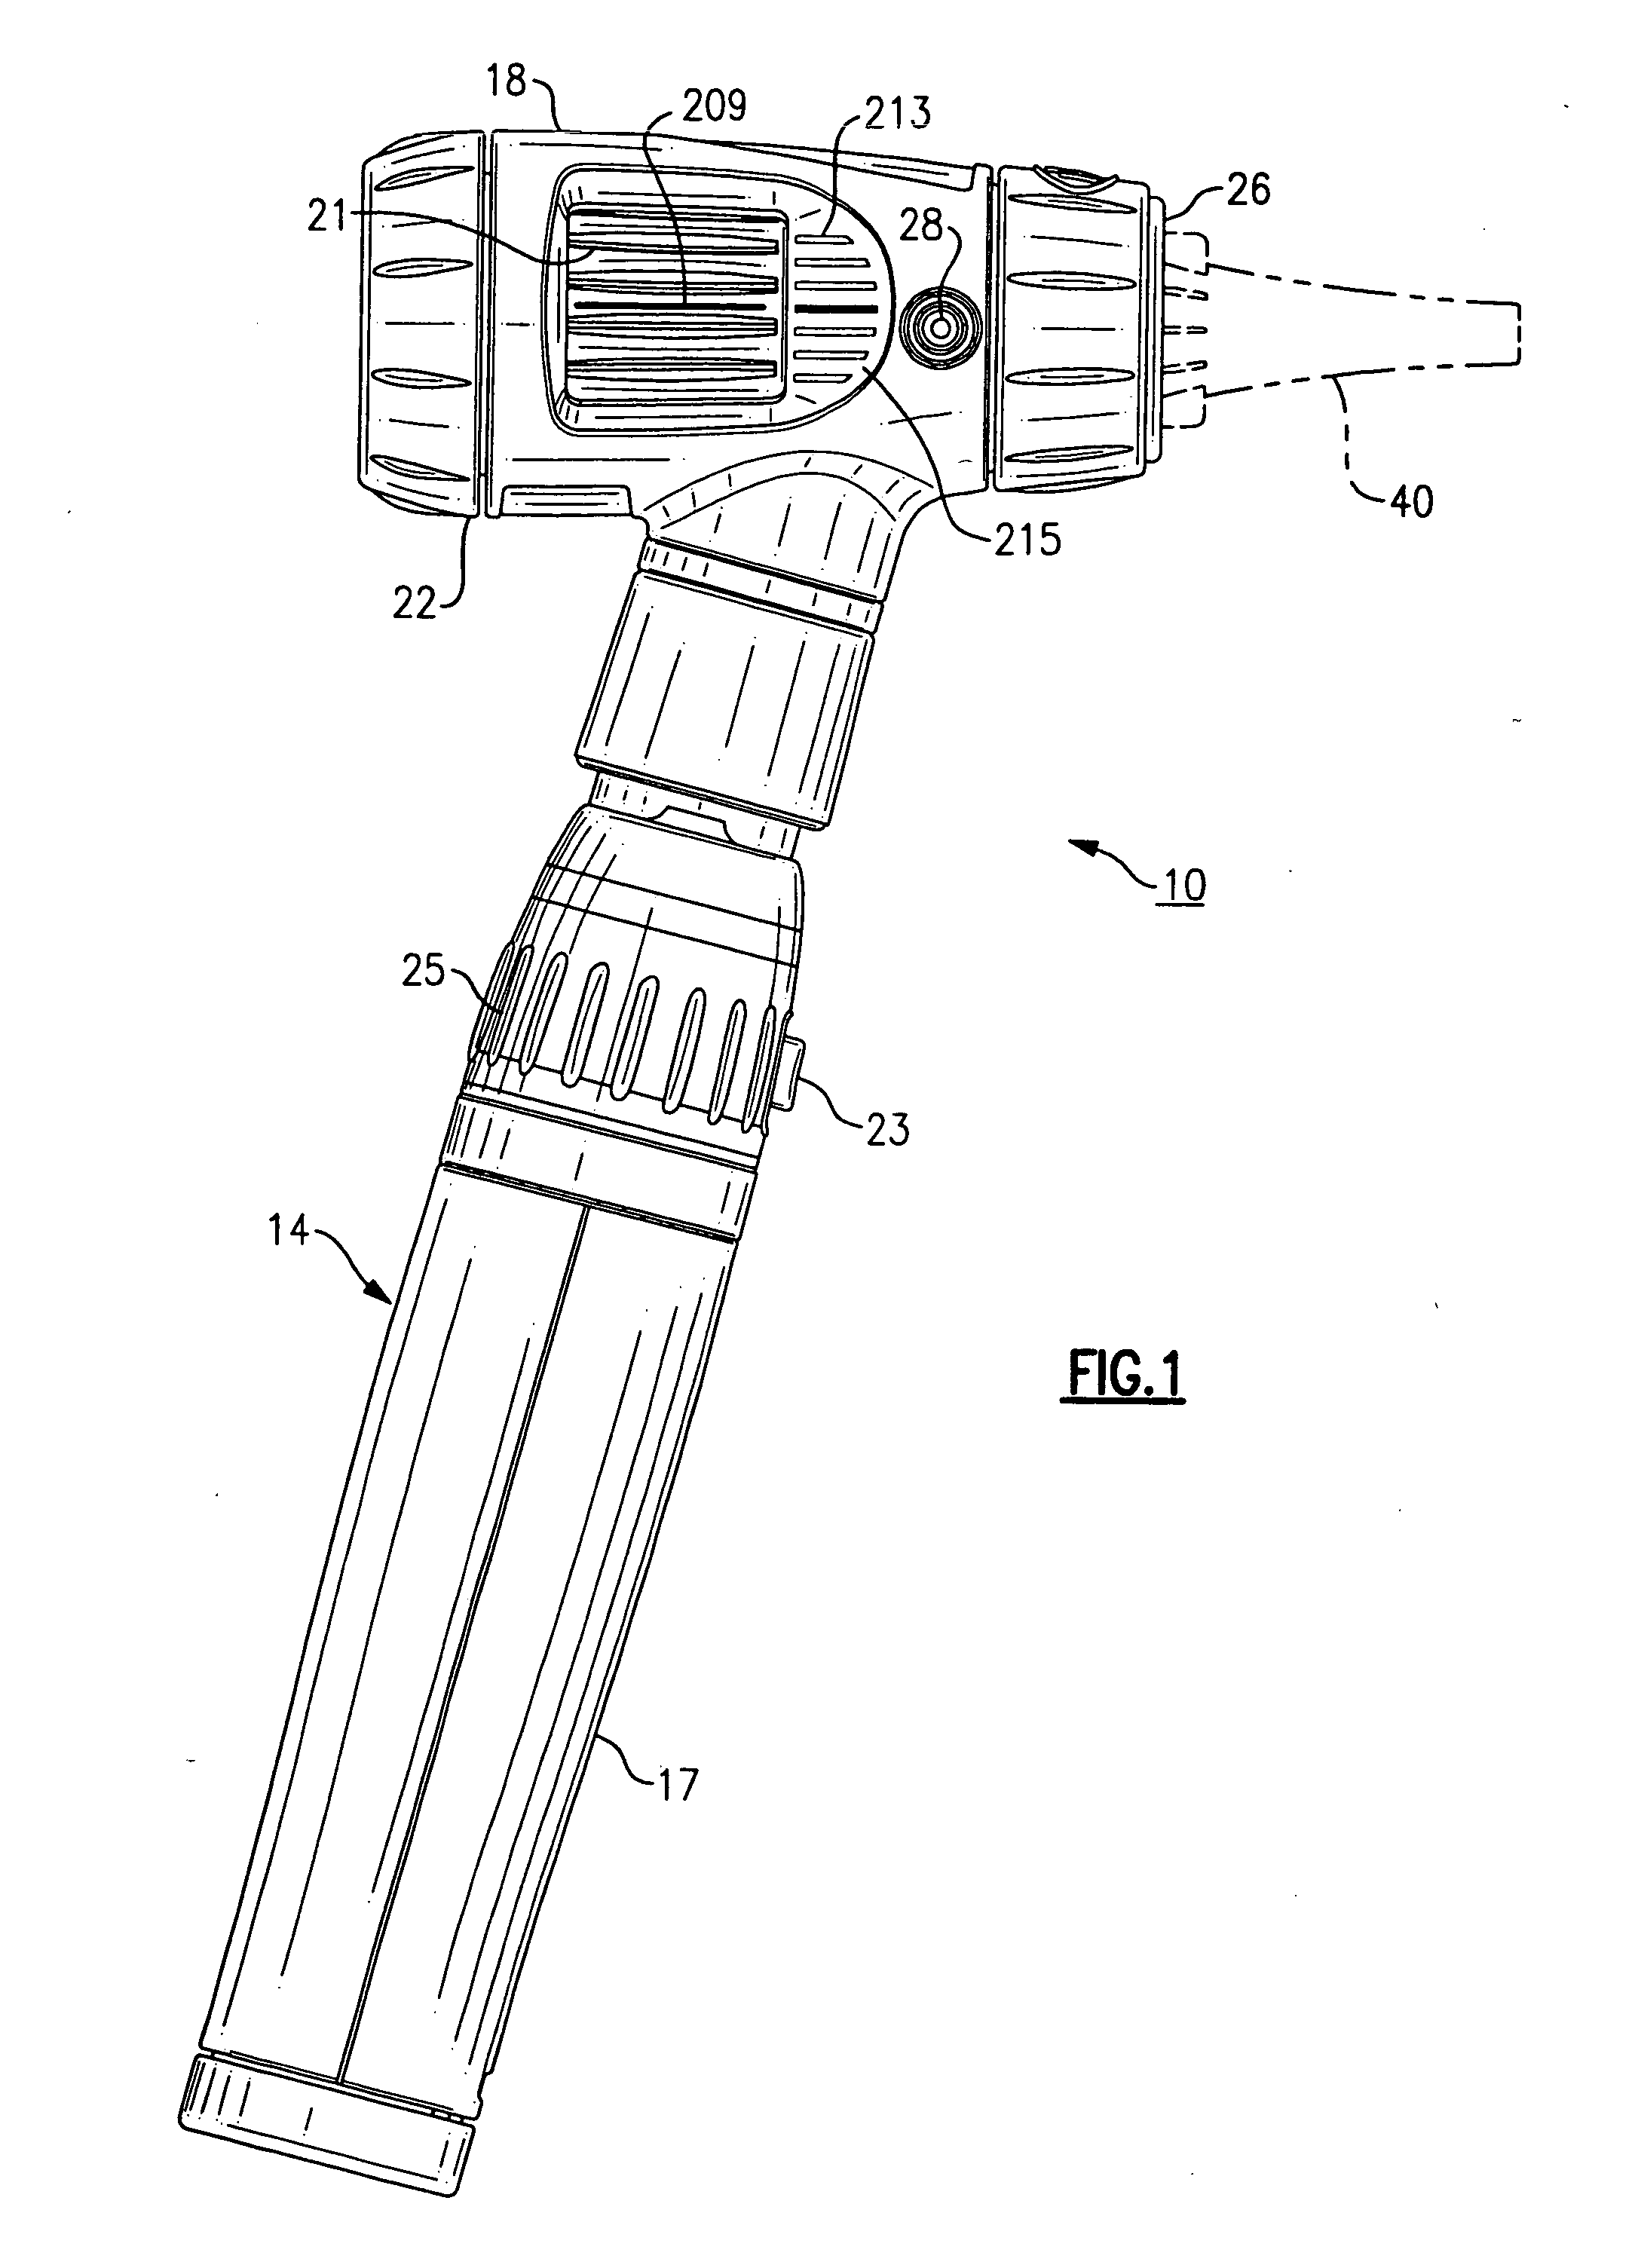 Otoscopic tip element and related method of use